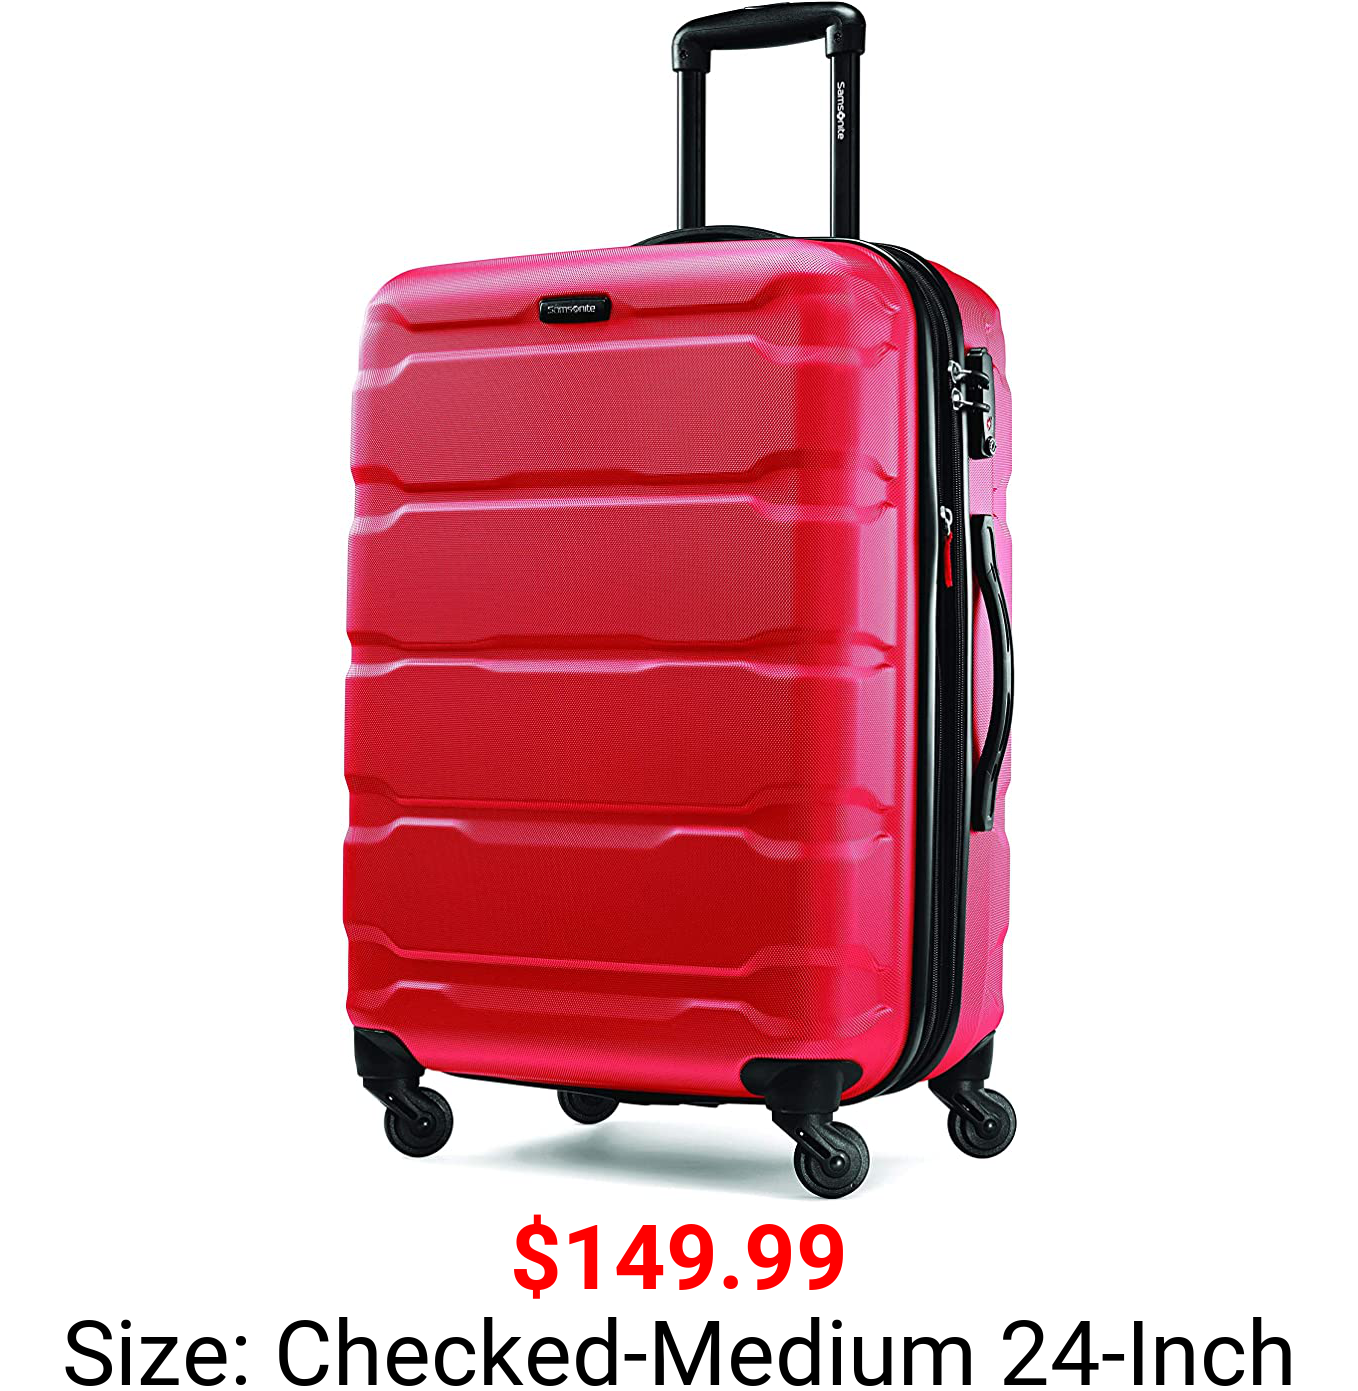 Samsonite Omni PC Hardside Expandable Luggage with Spinner Wheels, Red, Checked-Medium 24-Inch